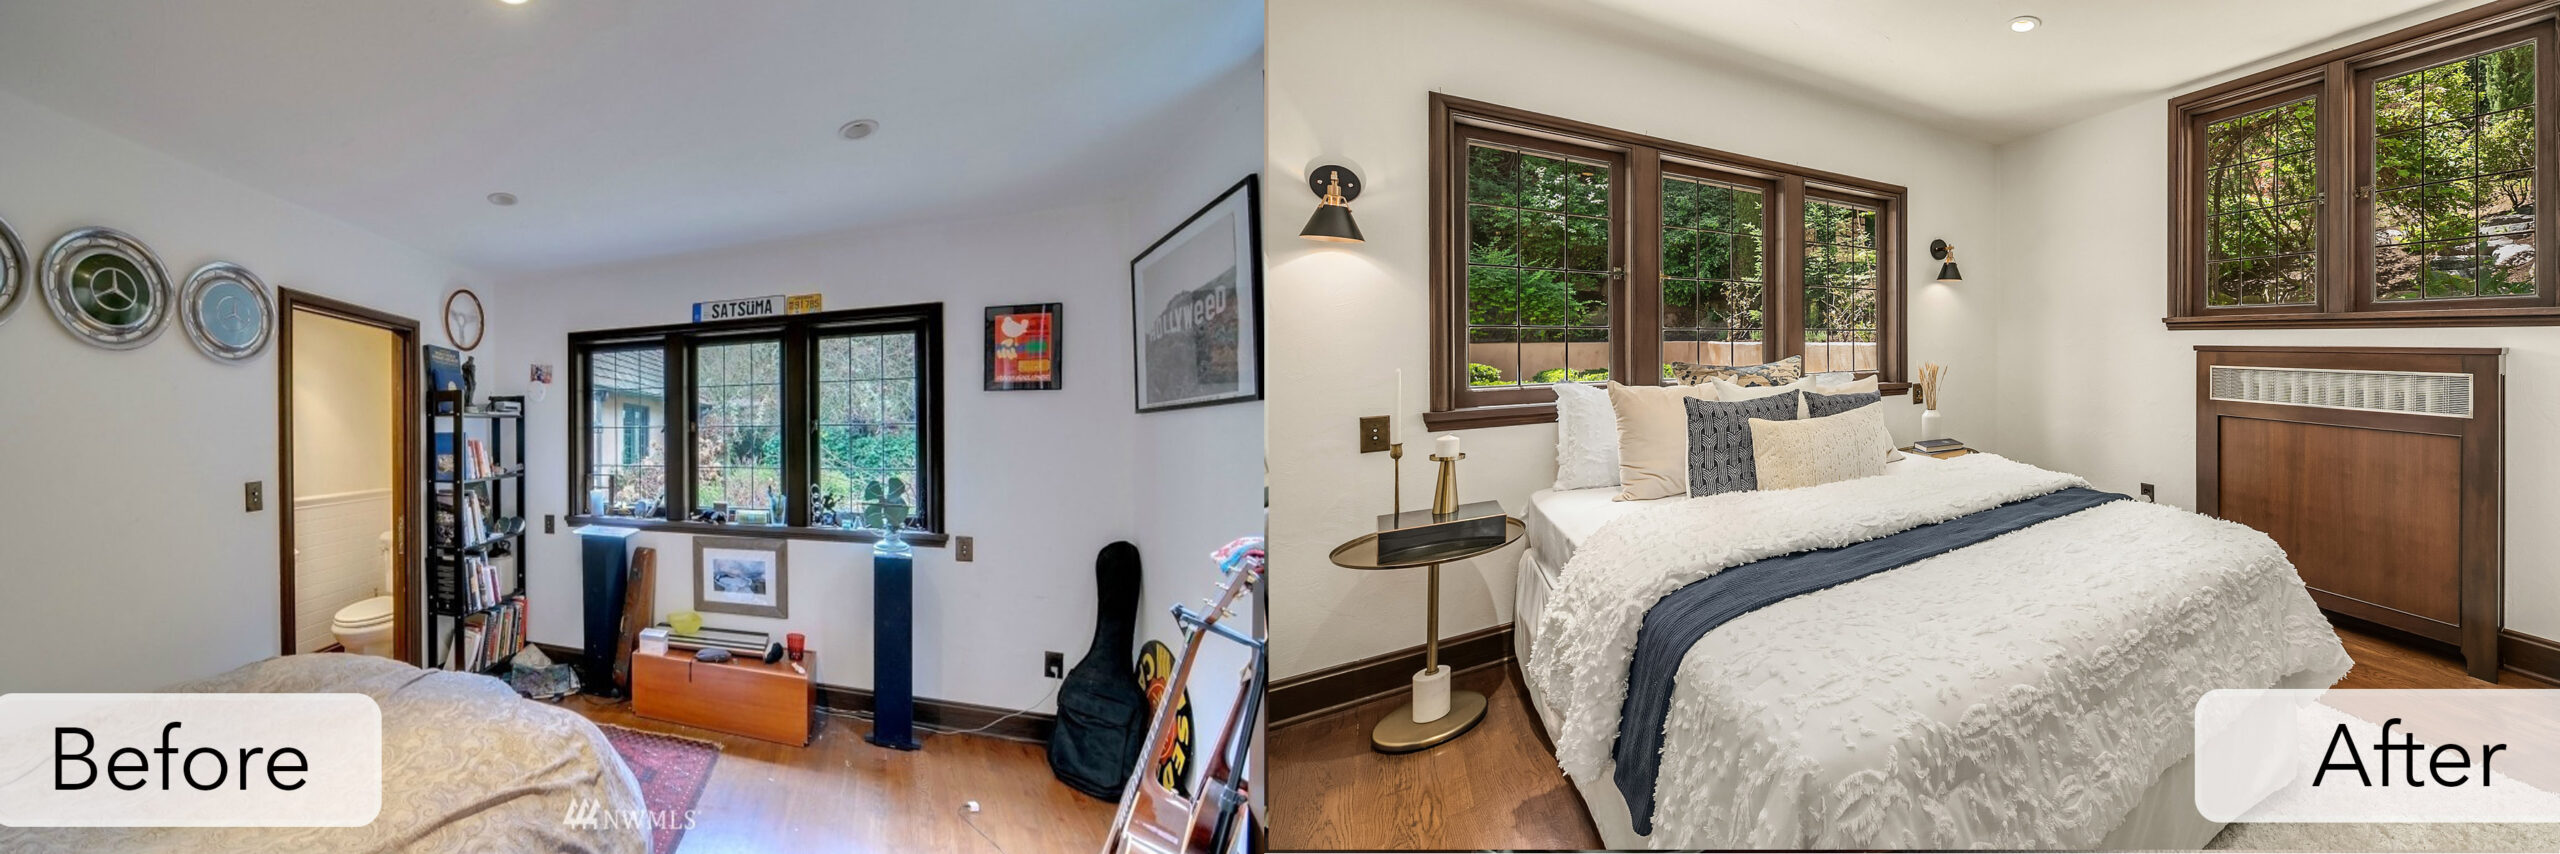 luxury mercer island guest bedroom before and after